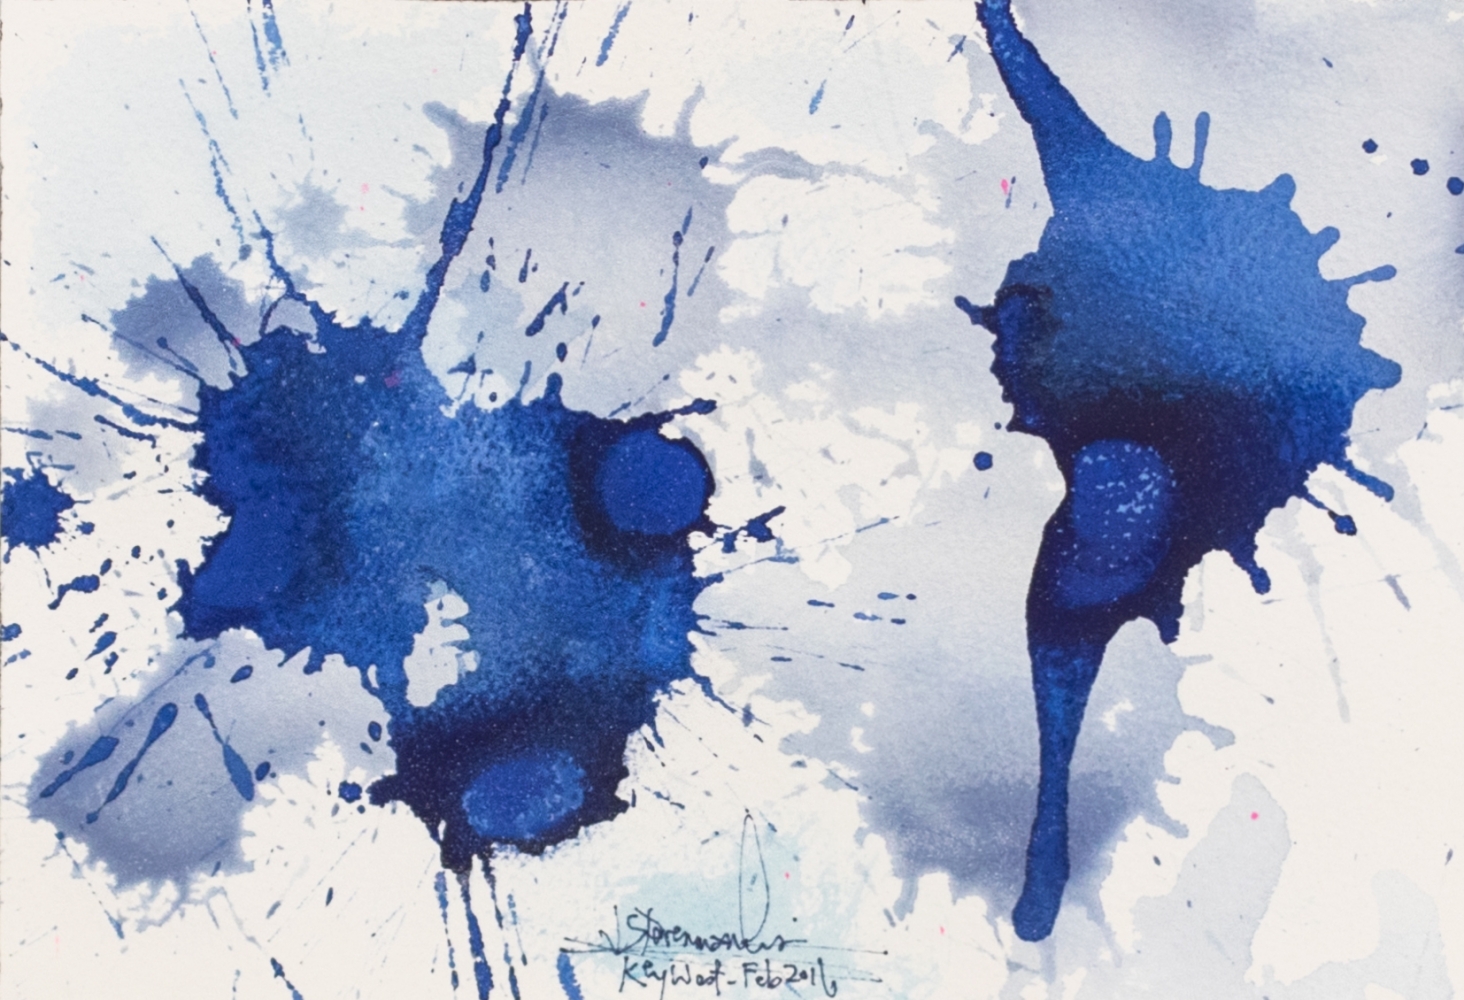 J. Steven Manolis, Splash (Key West) 07.10.03, 2016, watercolor painting on Arches paper, 7 x 10 inches, Blue Abstract Art, Splash Art for sale at Manolis Projects Art Gallery, Miami, Fl